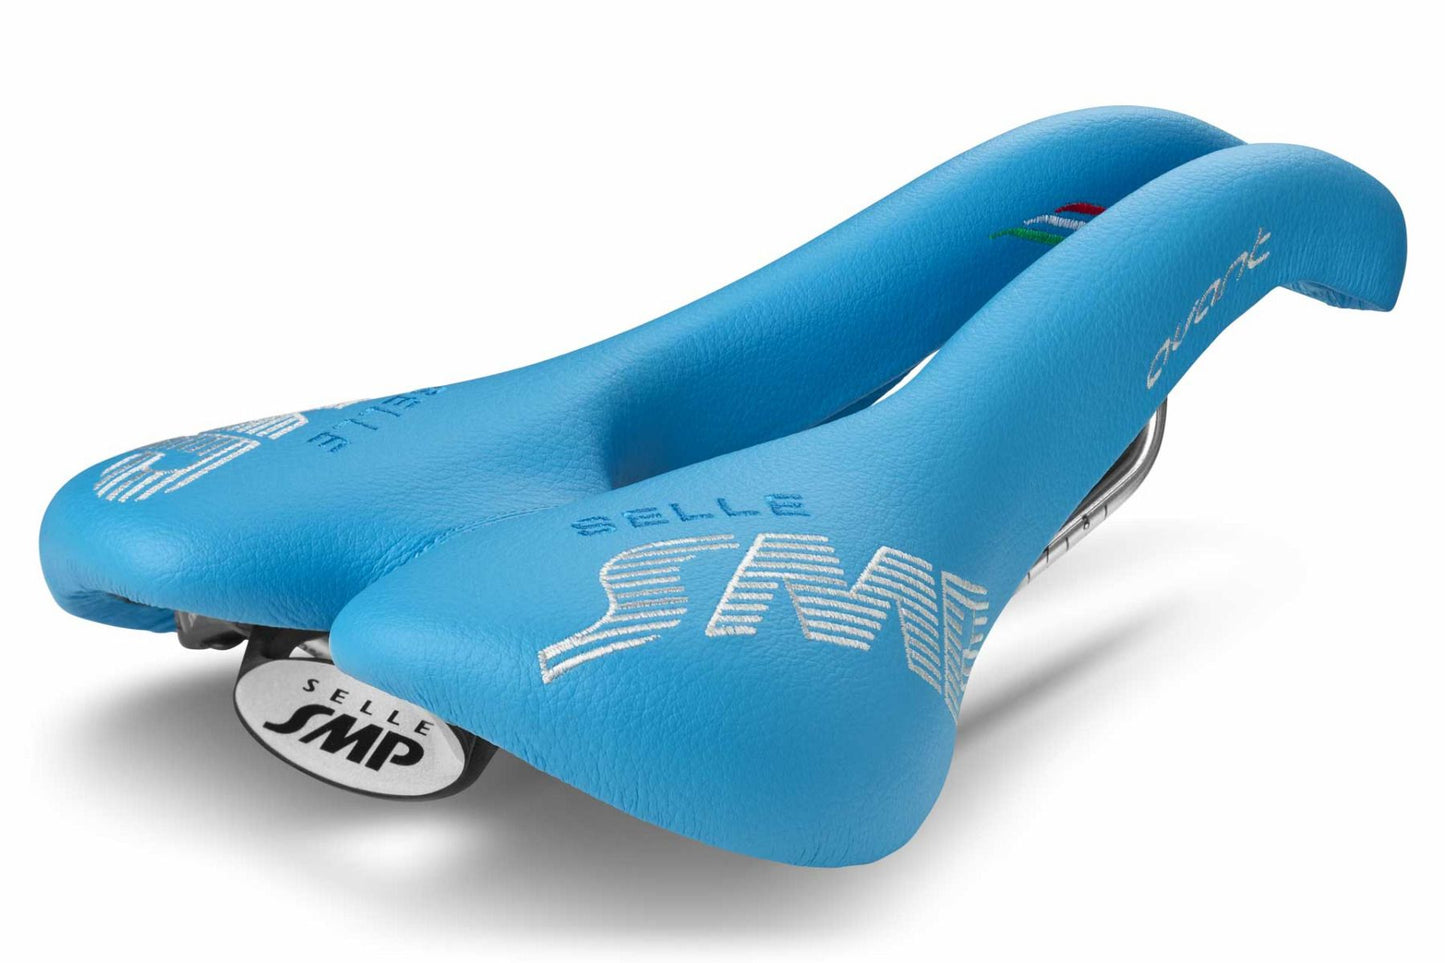 Selle SMP Avant Saddle with Stainless Steel Rails (Light Blue)